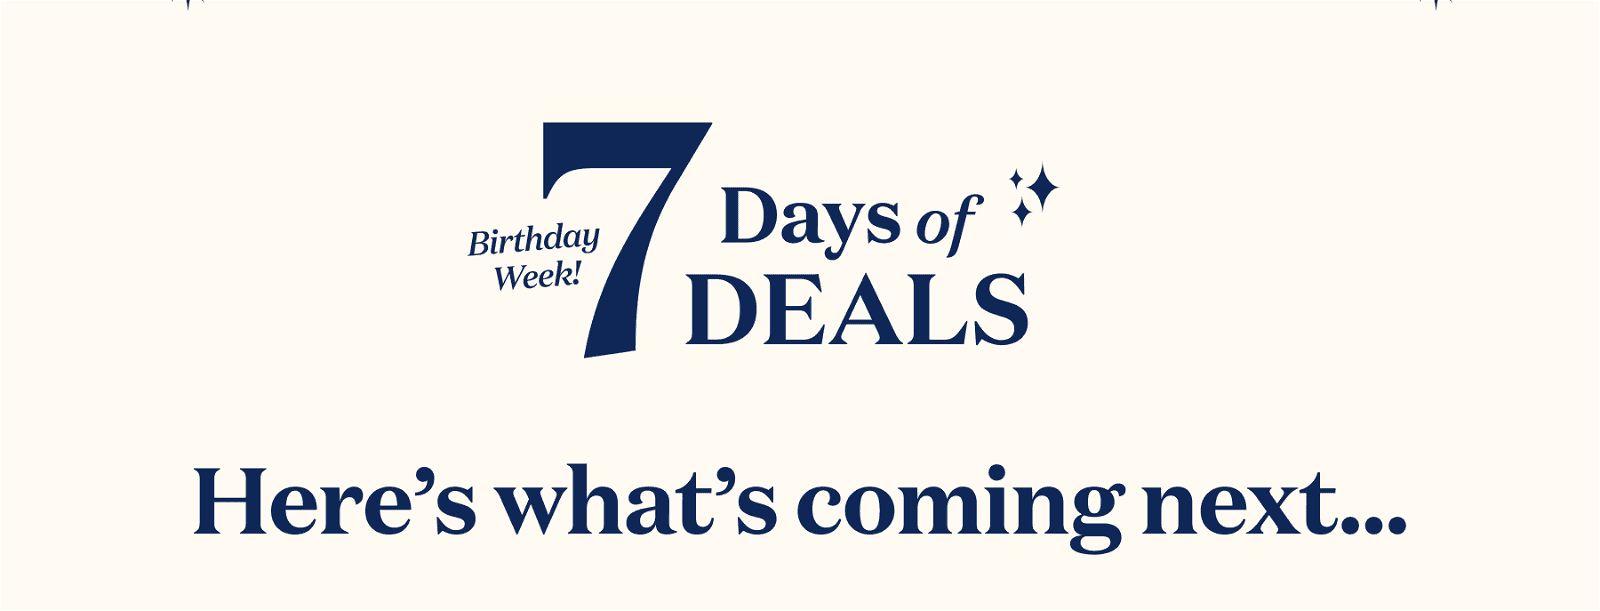 7 Days of Deals - Here's what 's coming next